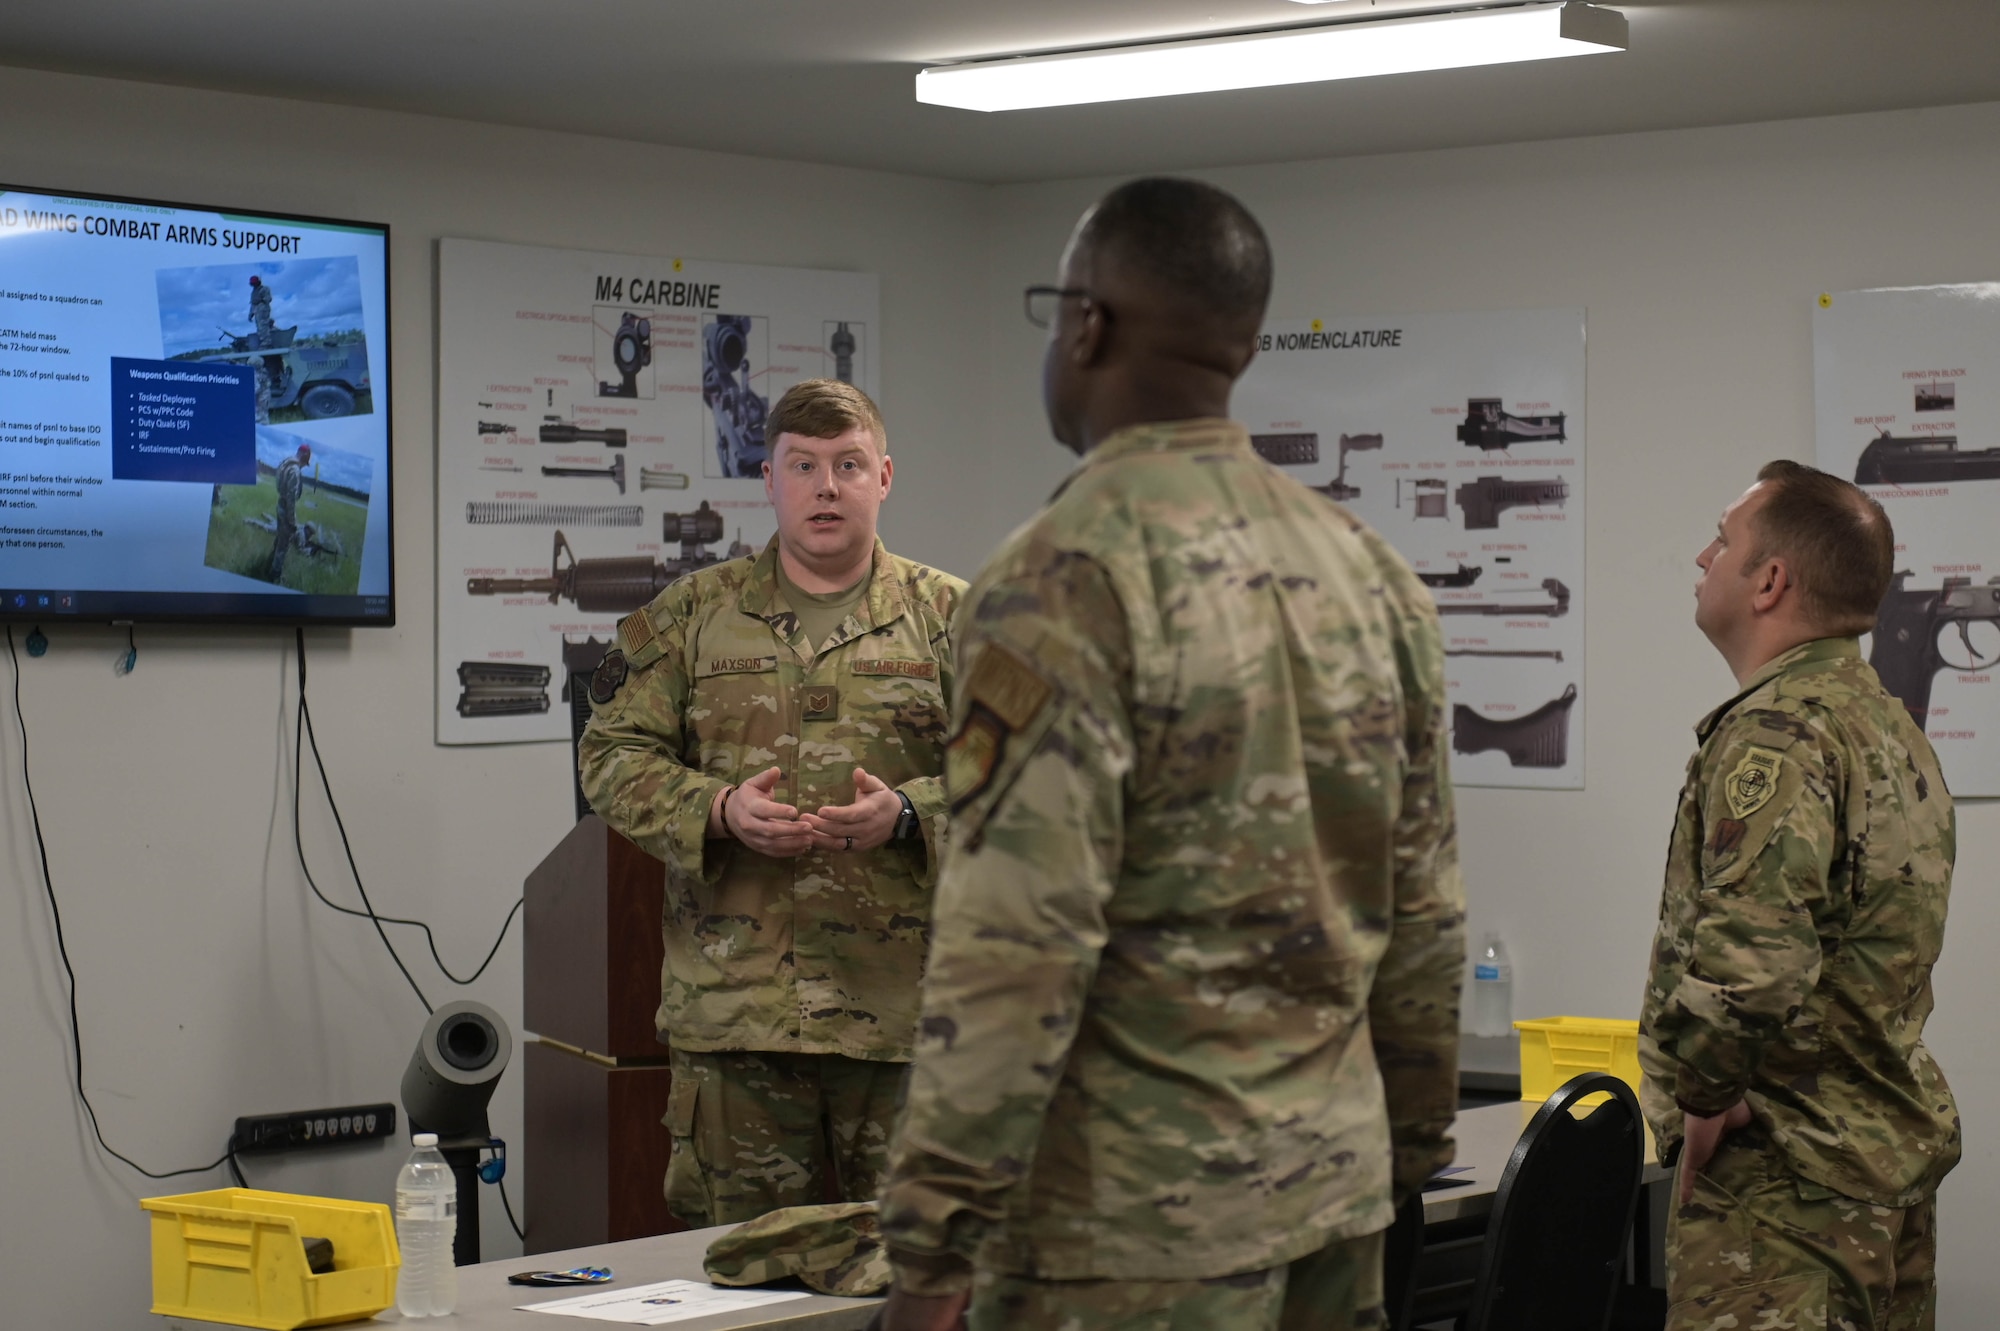 U.S. Air Force Tech. Sgt. Jeffrey Maxson, 23rd Security Forces Squadron noncommissioned officer in charge of combat arms, left, briefs Maj. Gen. Stacey Hawkins, Air Combat Command director of logistics, engineering and force protection, middle, and Chief Master Sgt. Lester Braithwaite, ACC A4 senior enlisted leader, right, about their initiatives to support Lead-Wing concepts March 24, 2022, at Moody Air Force Base, Georgia. The 23rd SFS is streamlining the way the combat arms staff trains and qualifies Immediate Response Force assigned personnel. (U.S. Air Force photo by Senior Airman Rebeckah Medeiros)